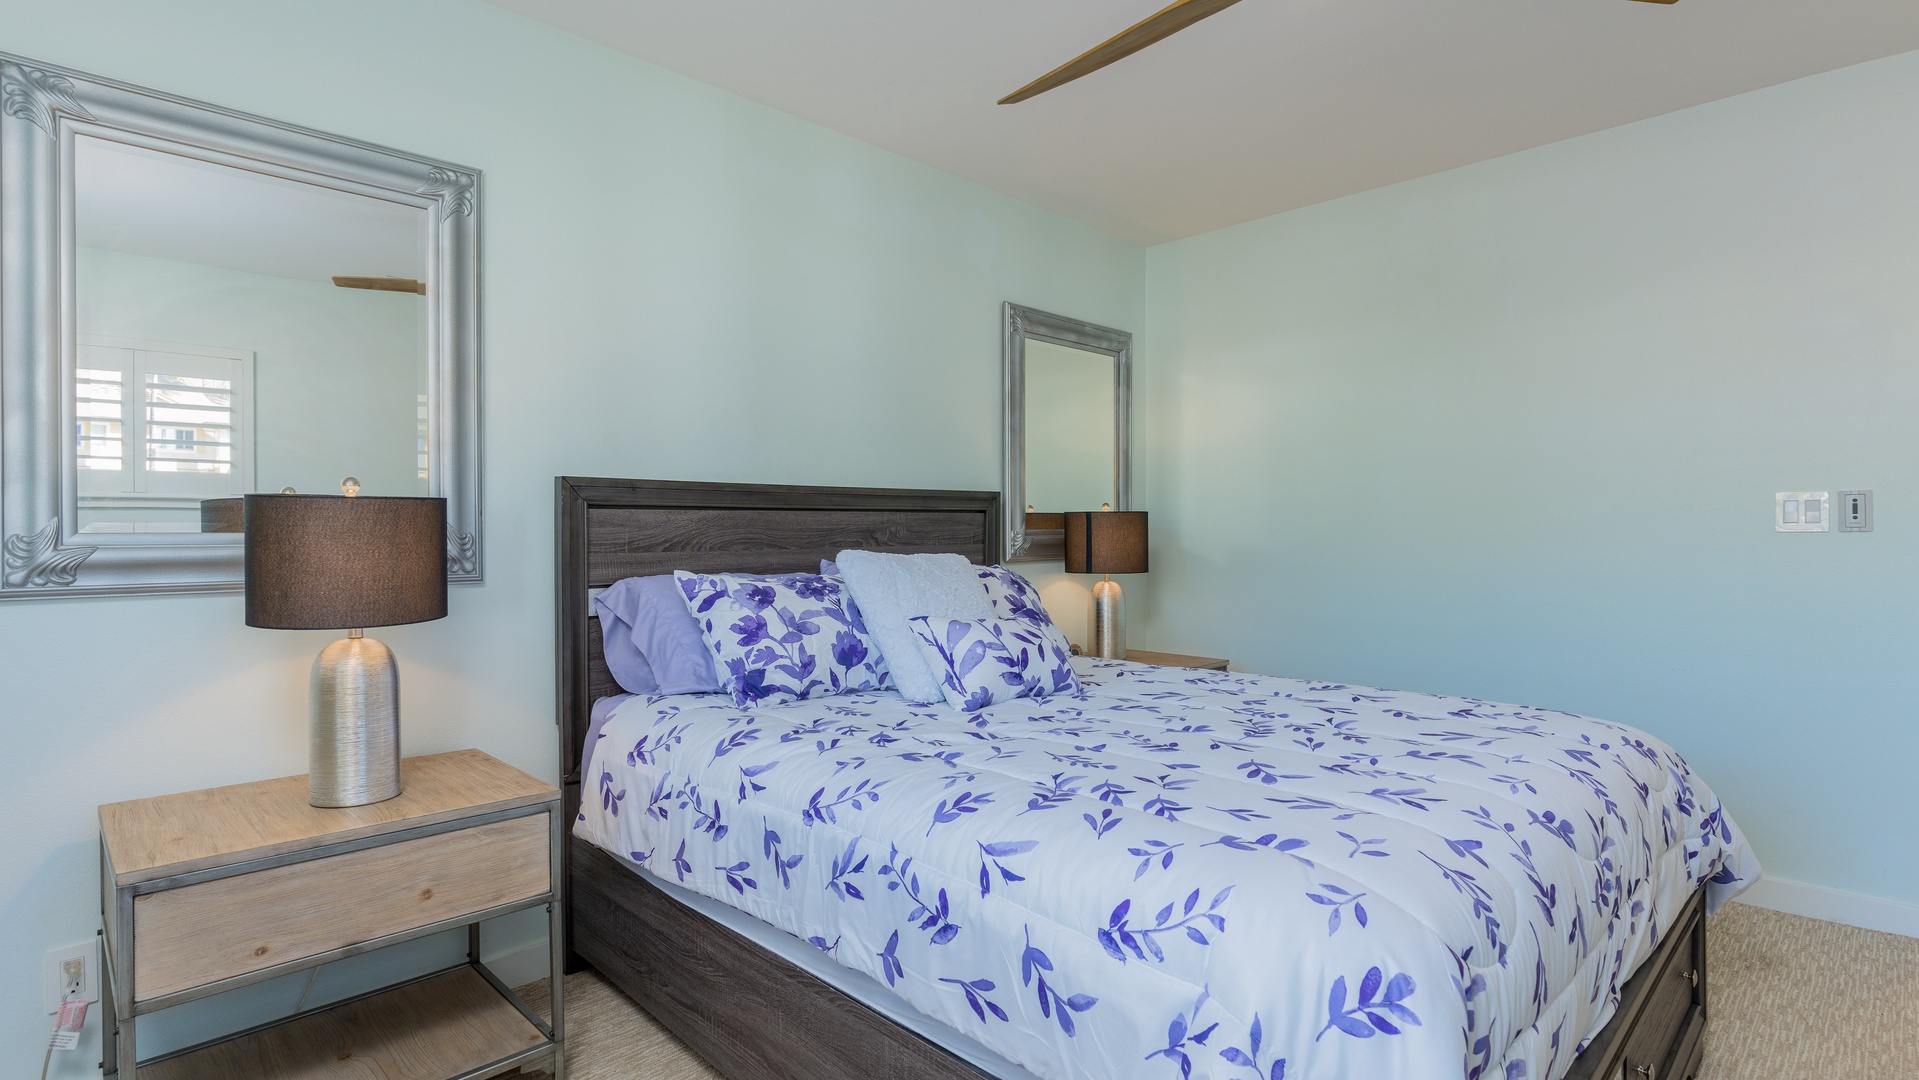 Kapolei Vacation Rentals, Kai Lani 21C - Enjoy the views and the television in the second guest bedroom.